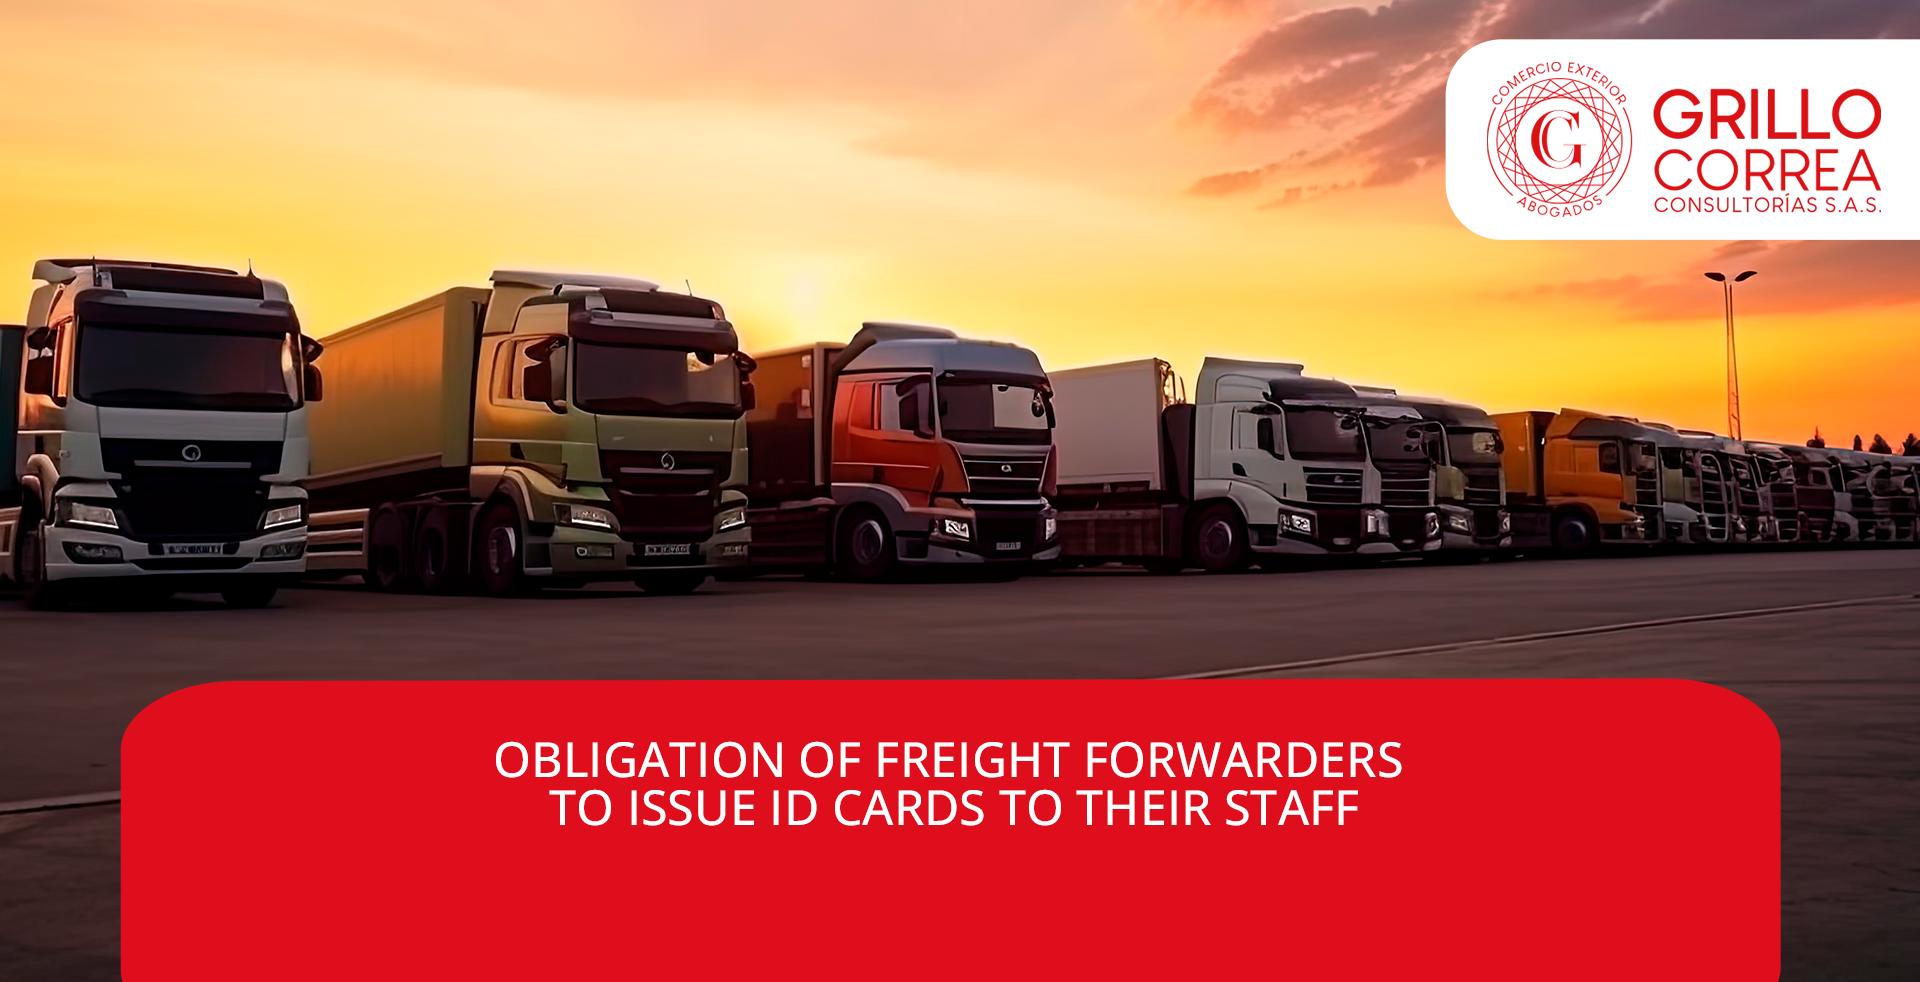 OBLIGATION OF FREIGHT FORWARDERS TO ISSUE ID CARDS TO THEIR STAFF